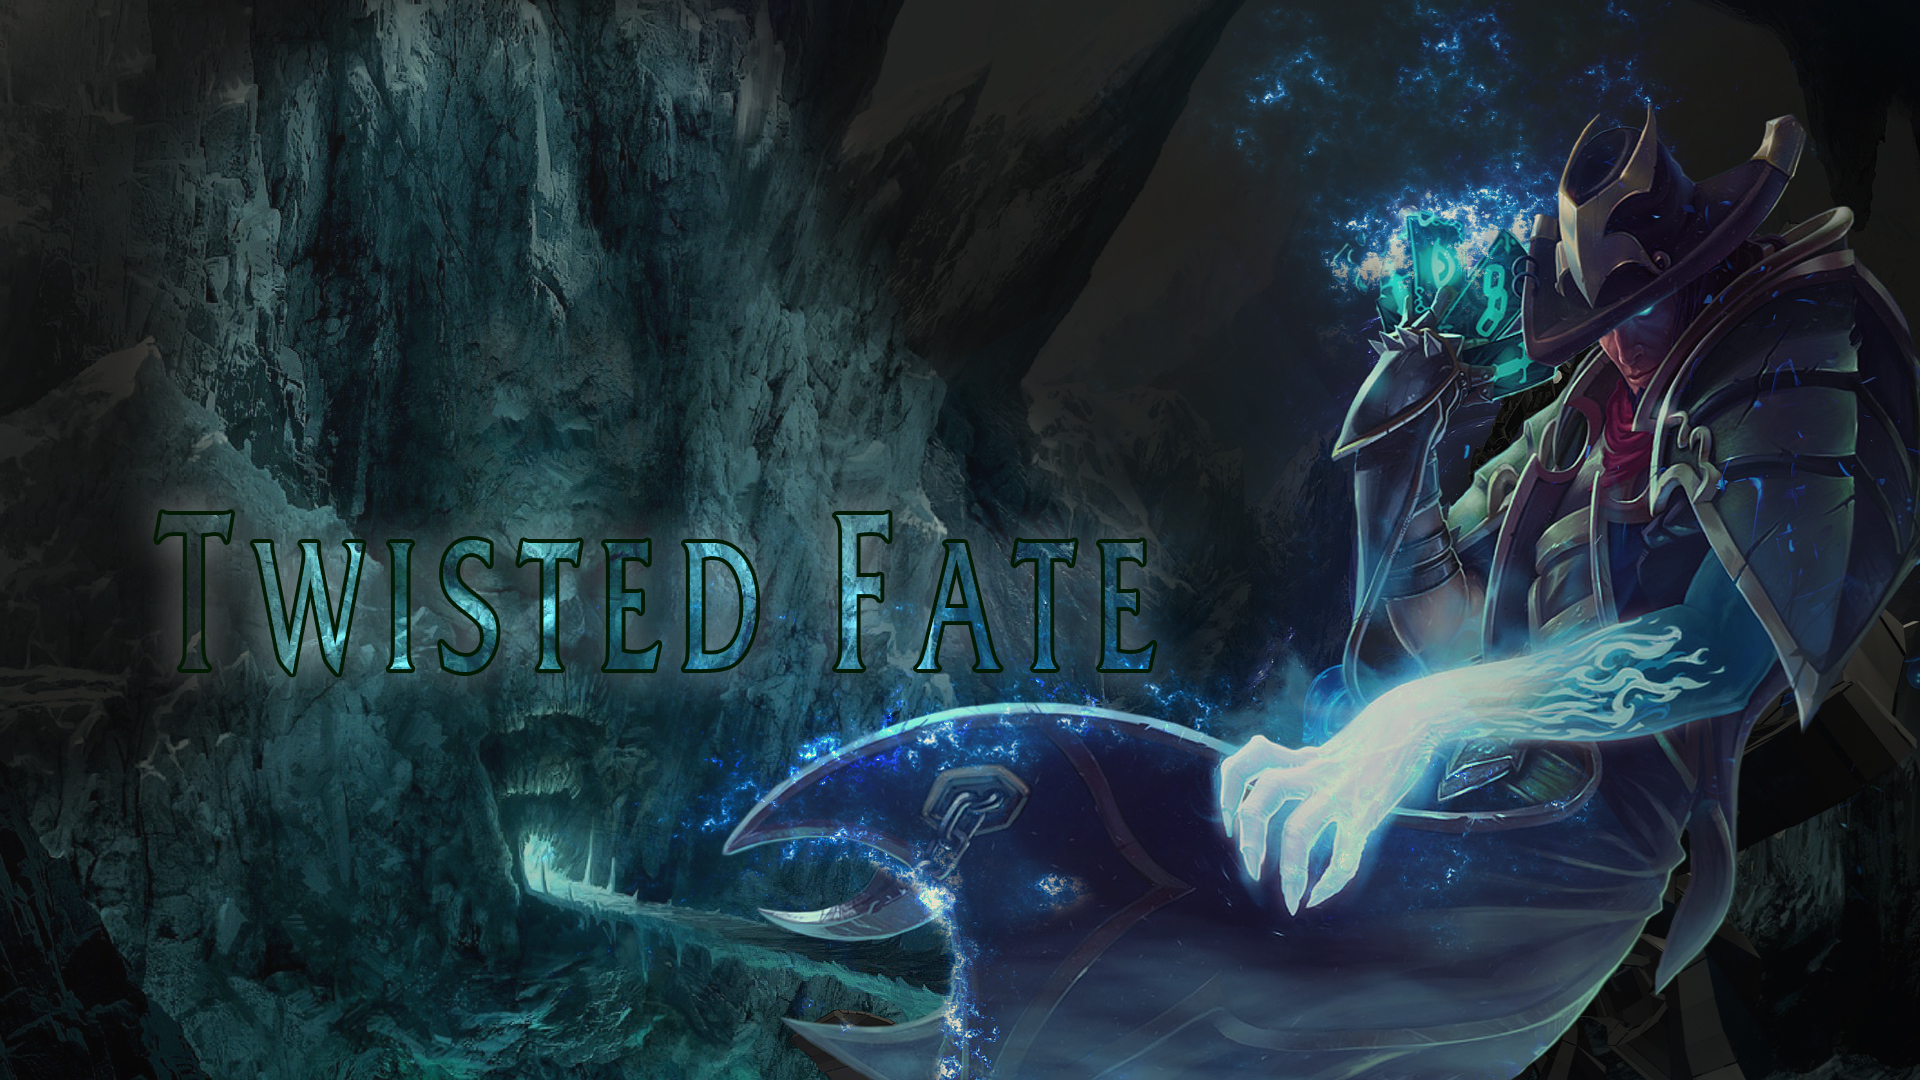 Twisted Fate Wallpaper by ganger design on